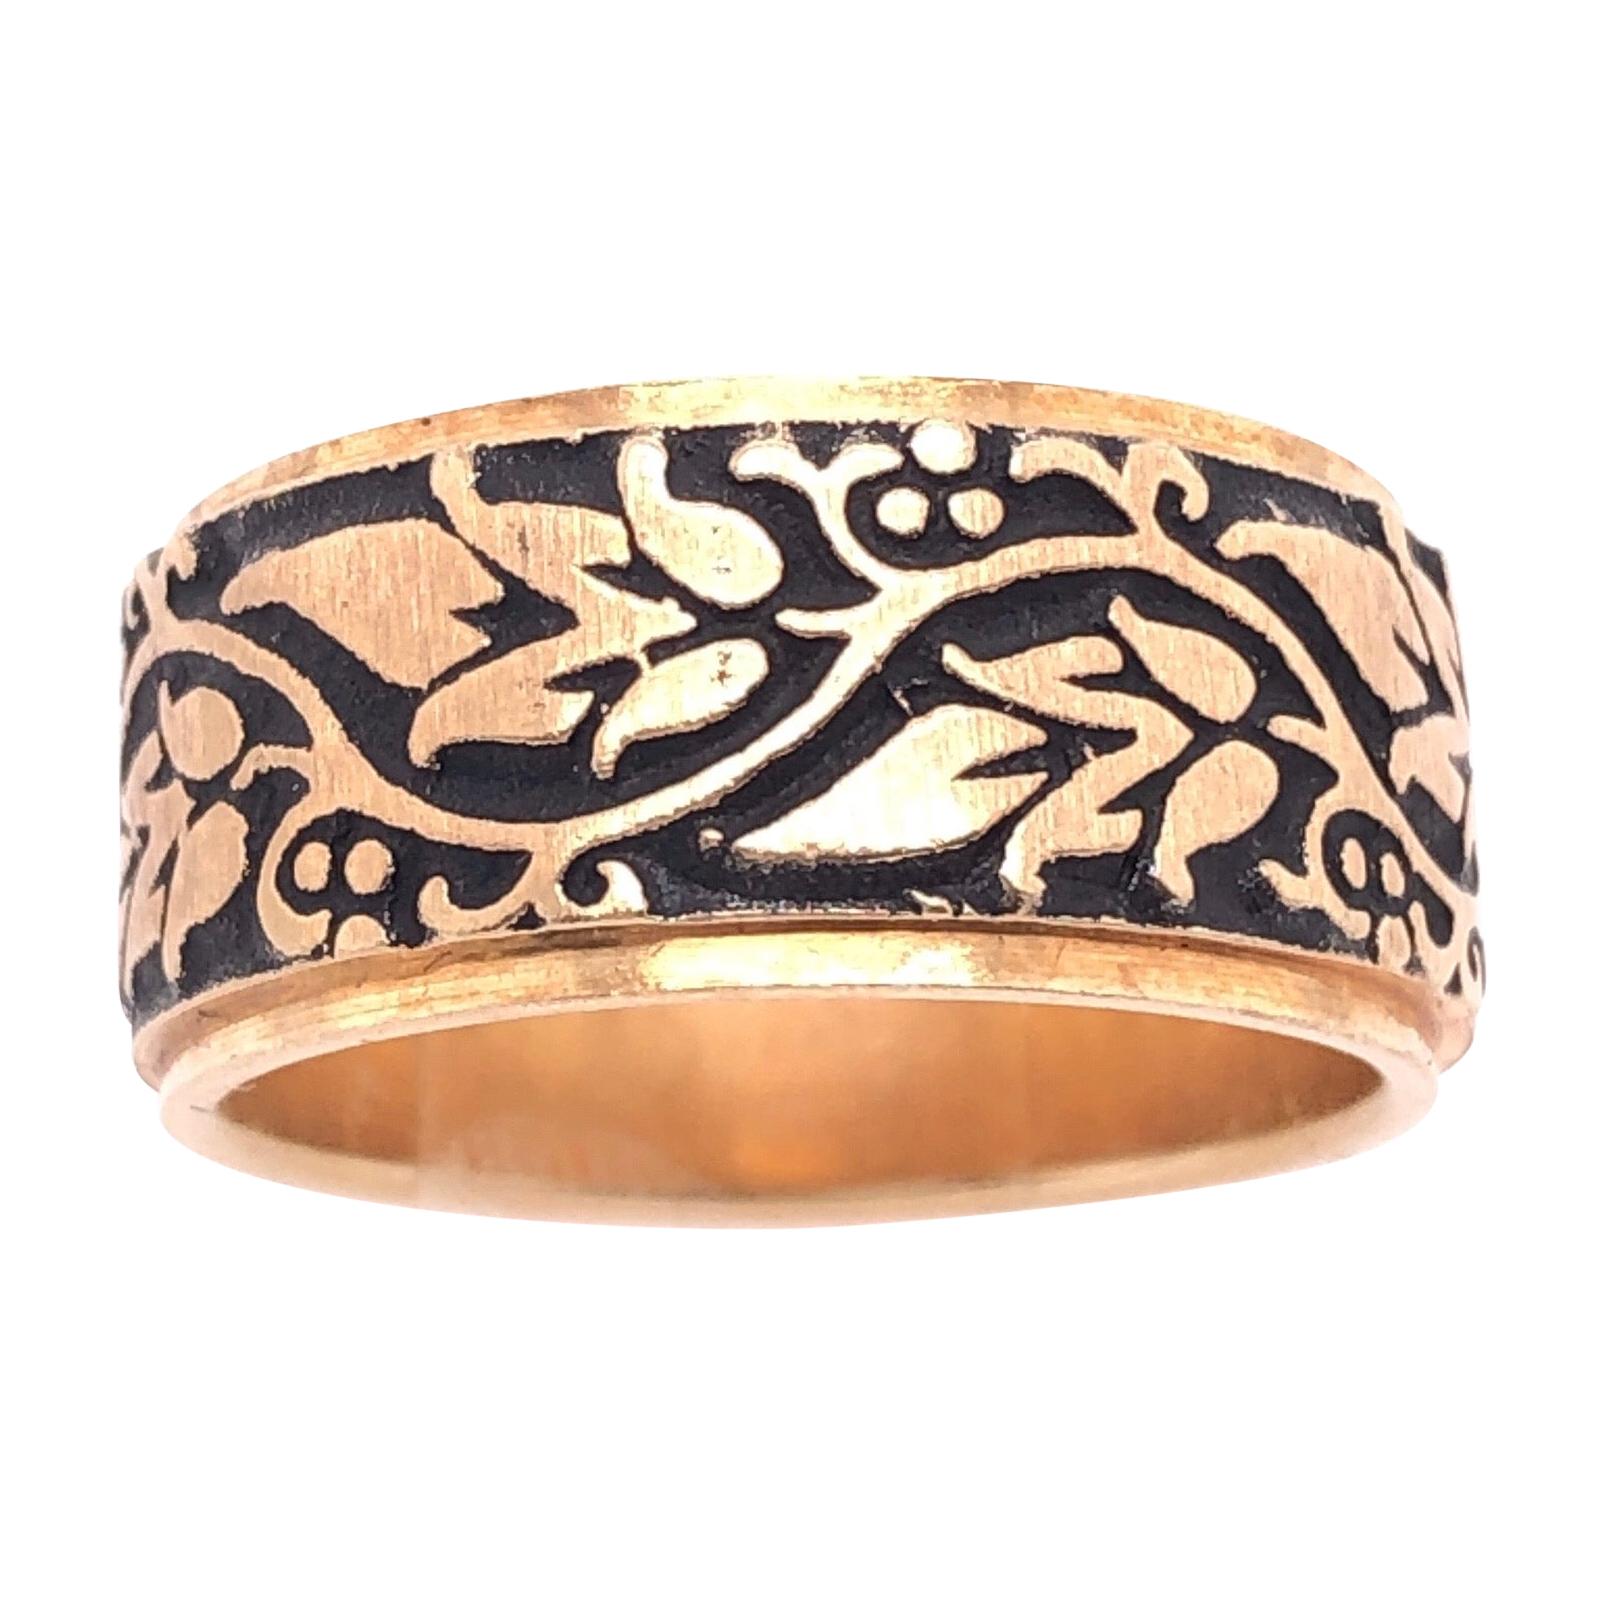 14 Karat Yellow Gold Continuous Etched Floral Wedding Band / Wedding Ring